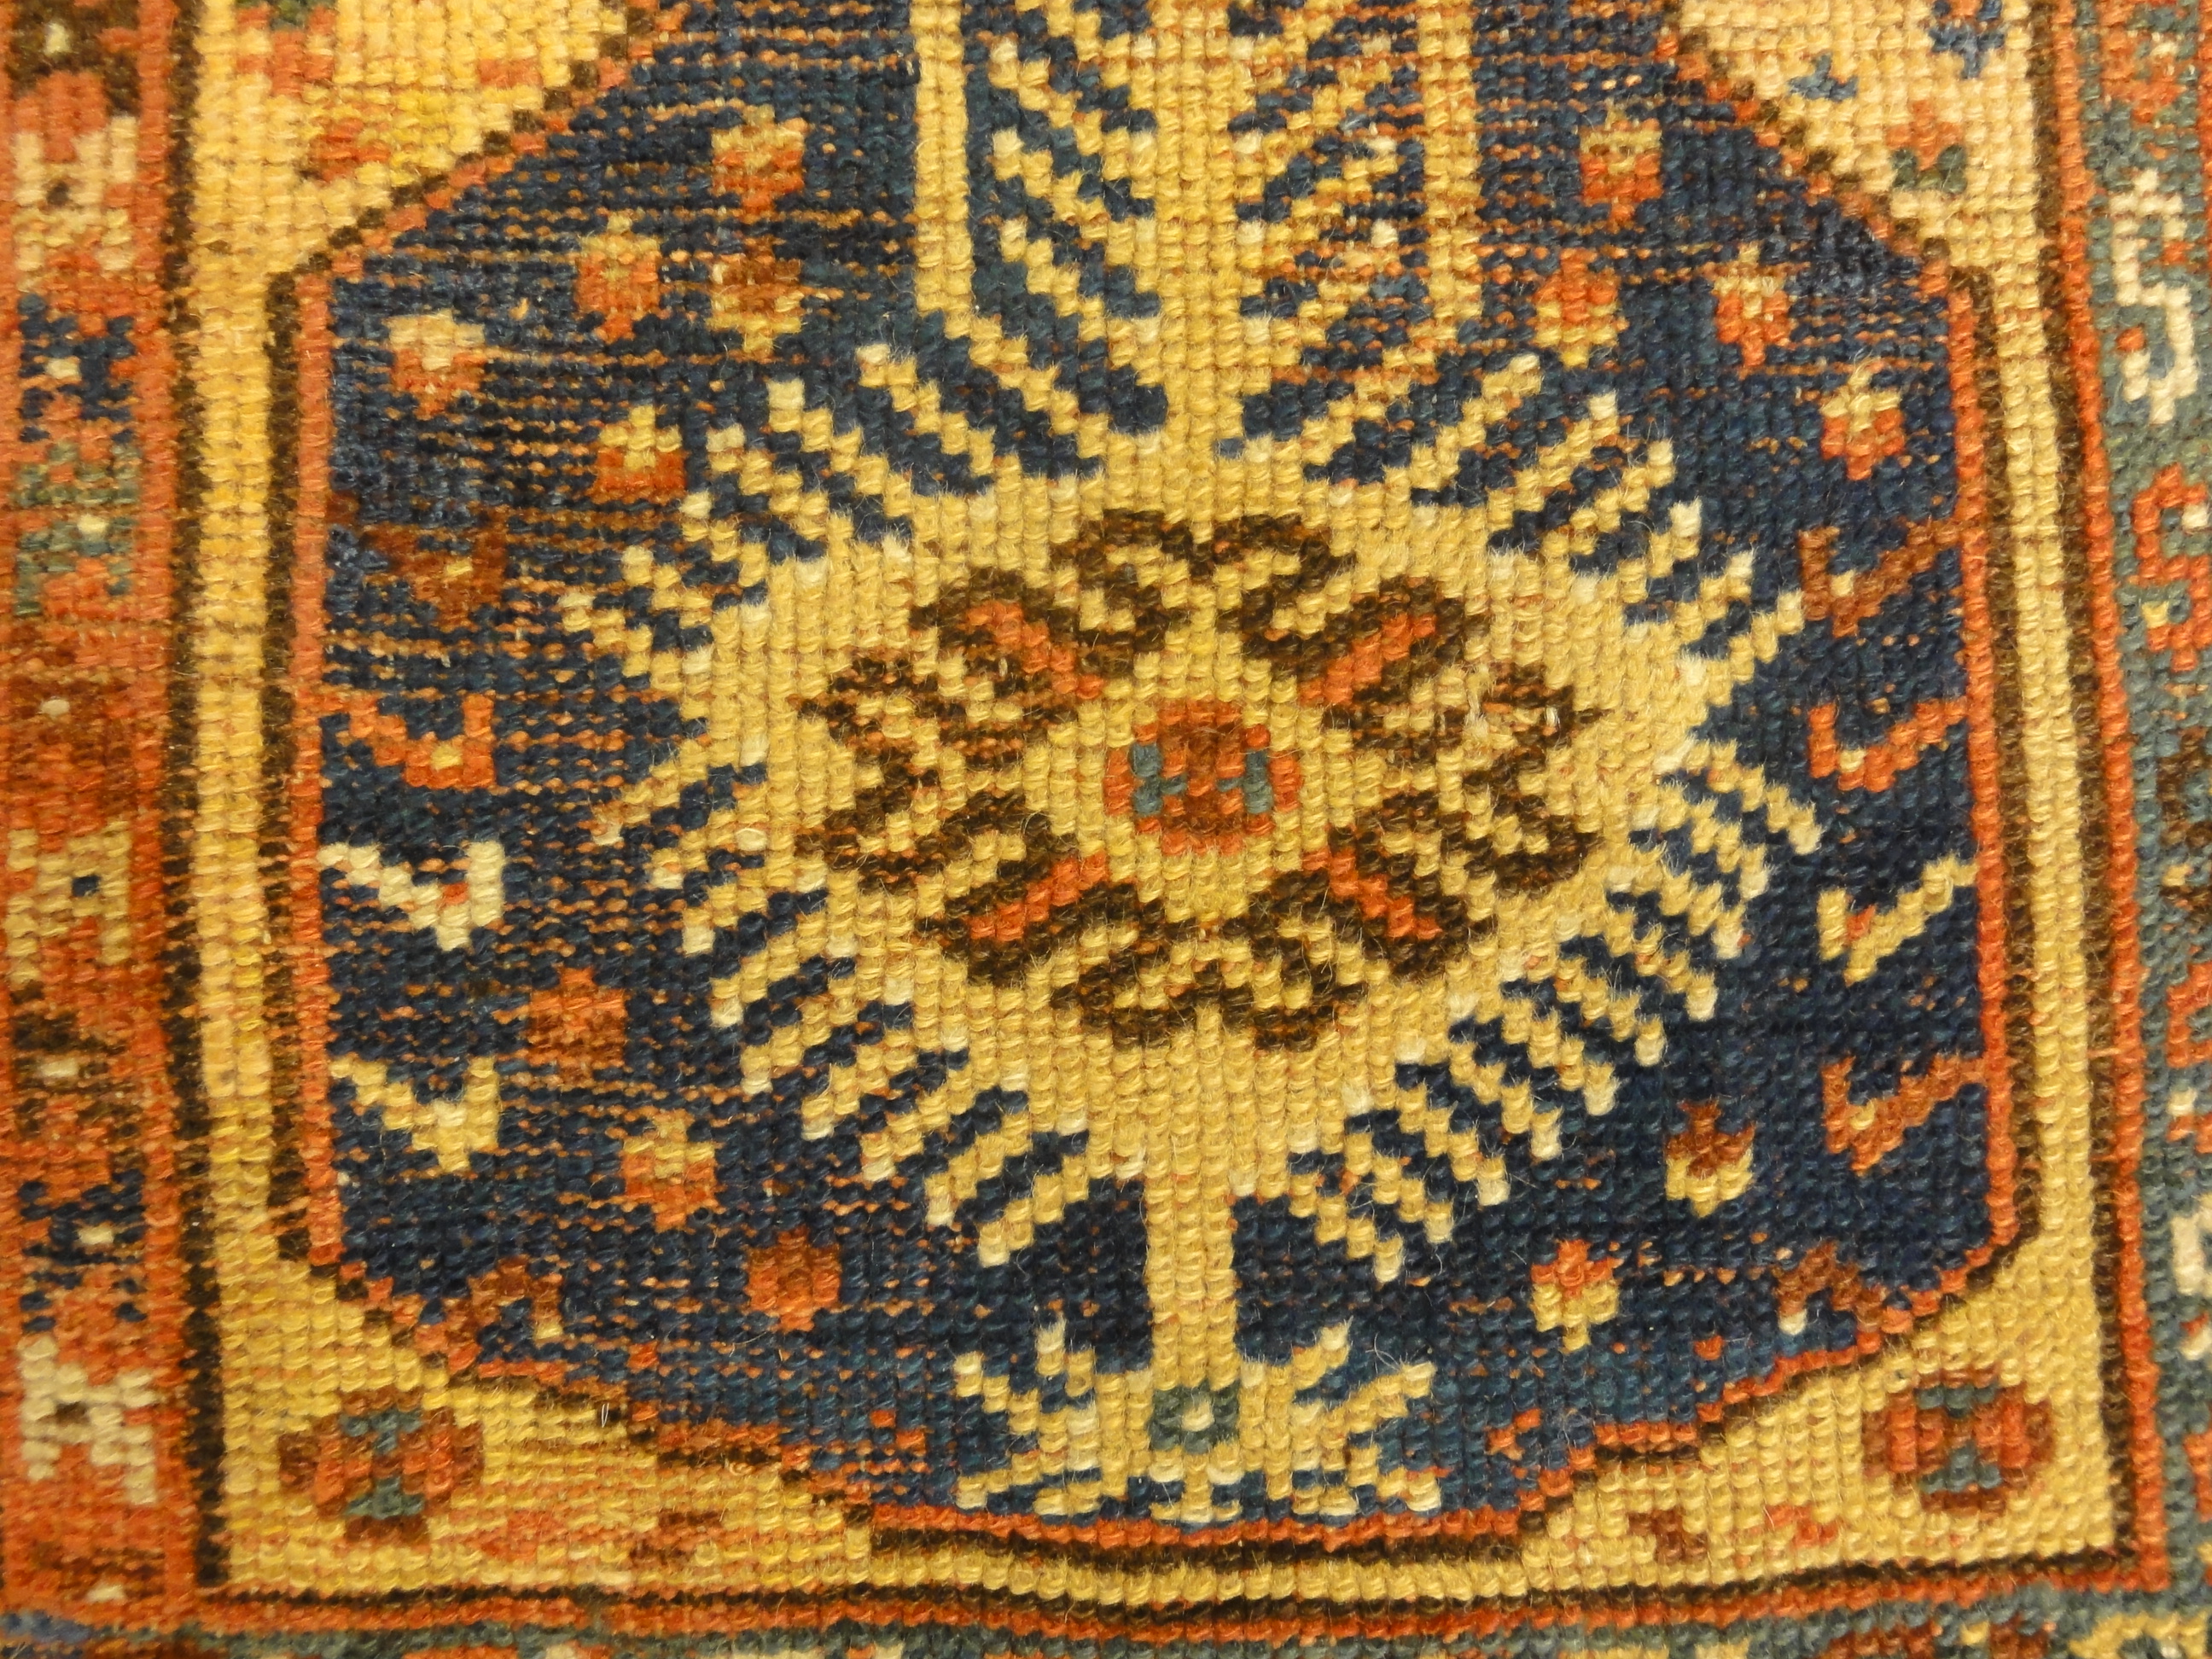 Rare Antique Turkish Tribal Makri Rug. A piece of genuine, woven carpet art sold by Santa Barbara Design Center, Rugs and More.